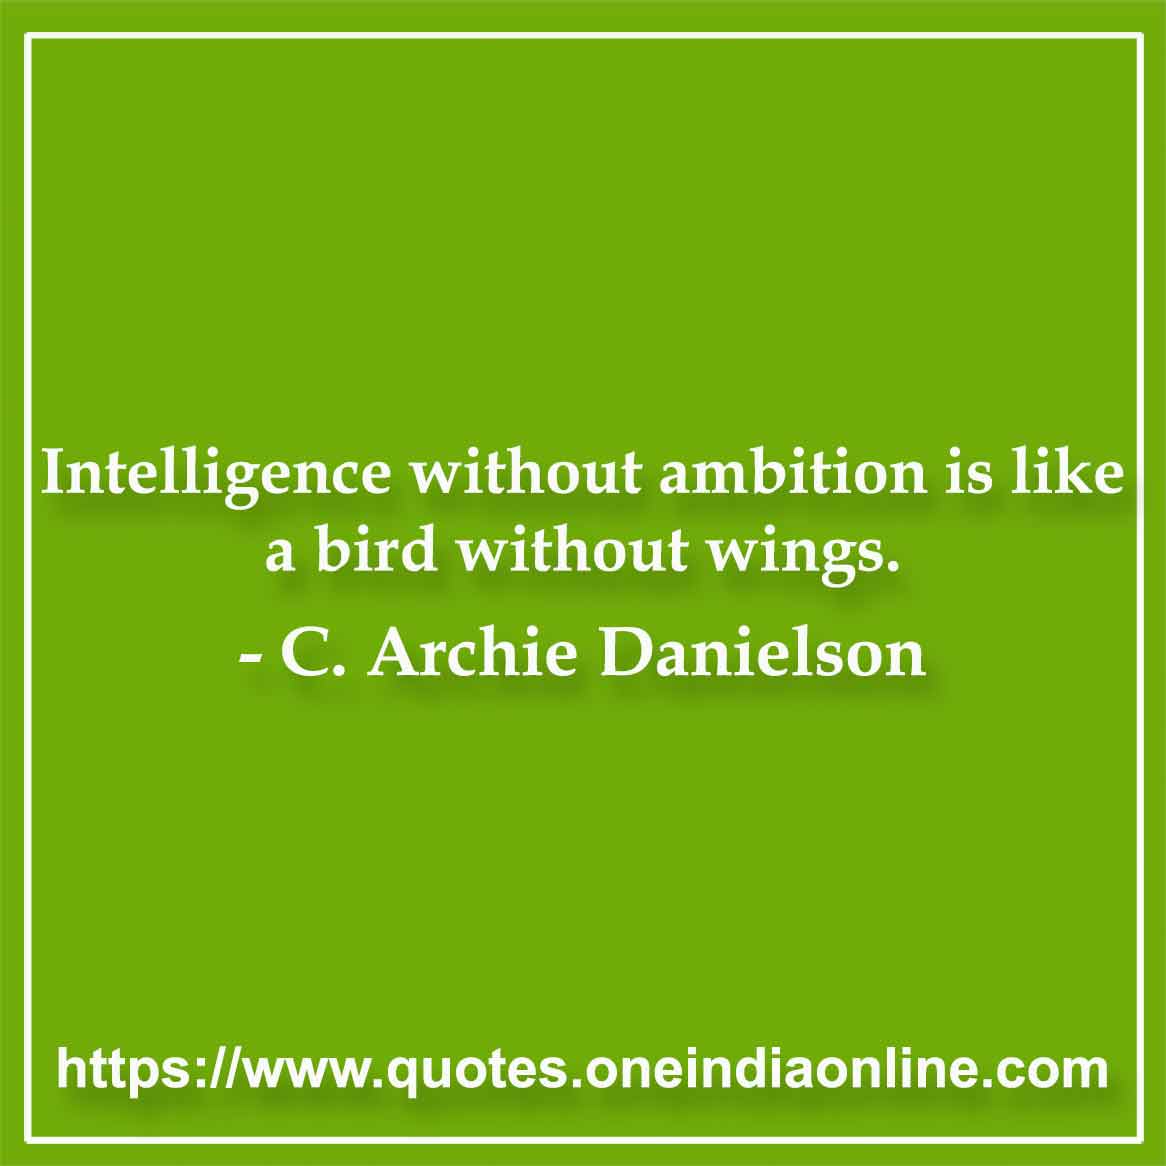 Intelligence without ambition is like a bird without wings. 

- C. Archie Danielson